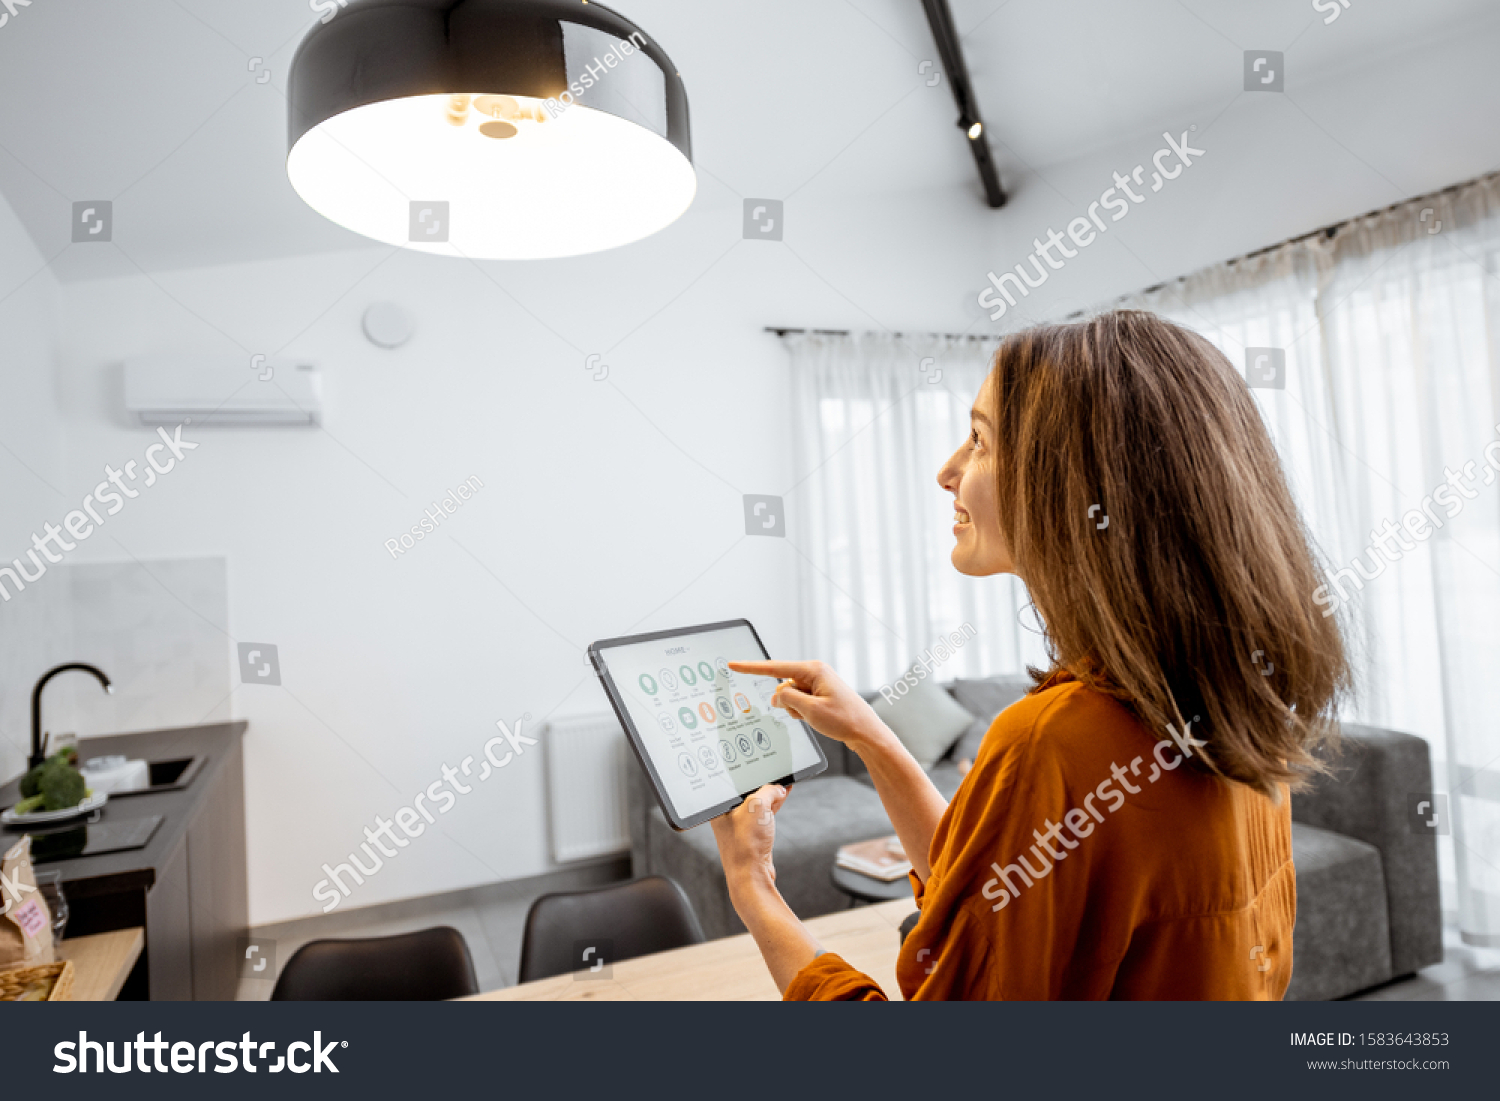 Young woman controlling home light with a digital tablet in the living room. Concept of a smart home and light control with mobile devices #1583643853